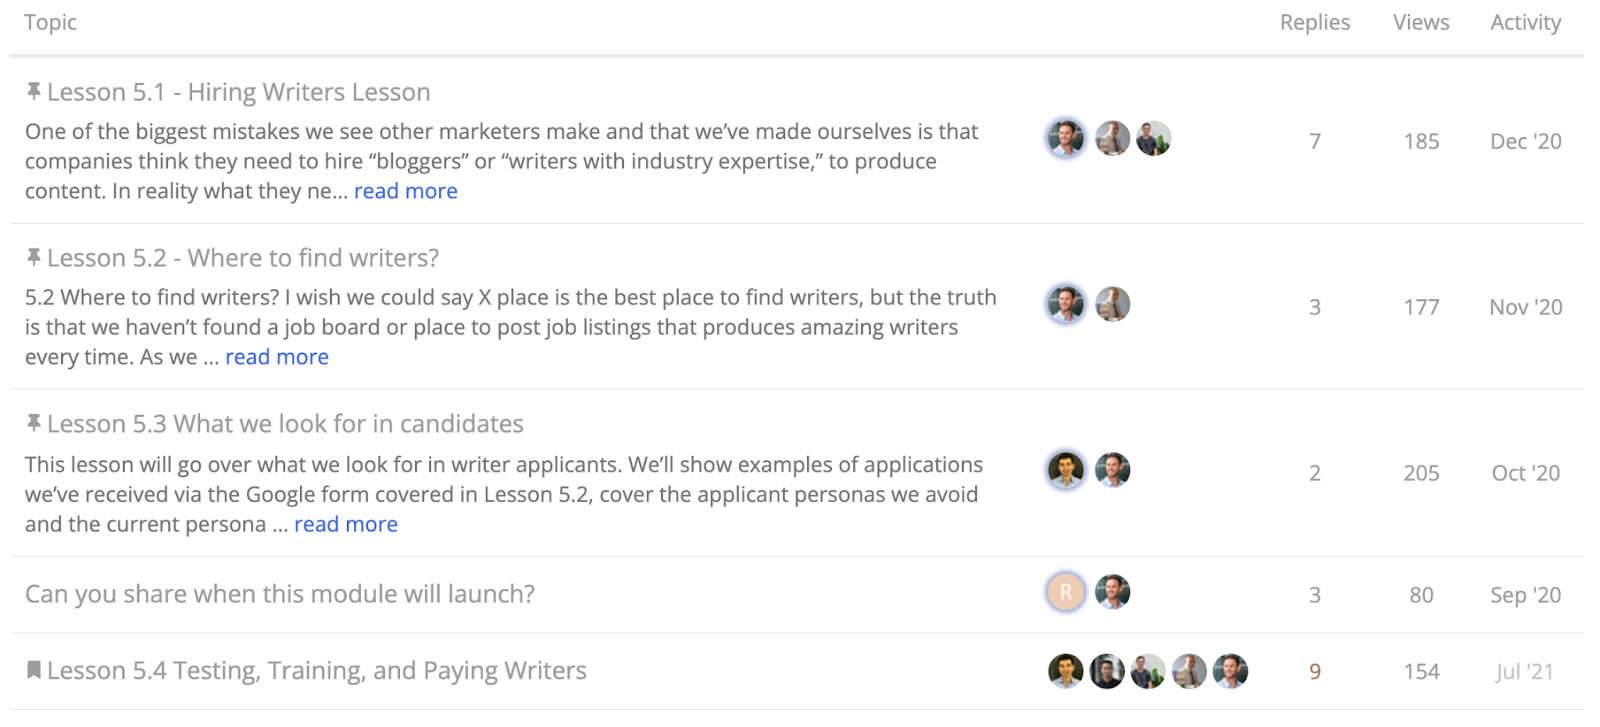 Module 5 covers Hiring Writers in the Grow and Convert B2B Content Marketing Course.